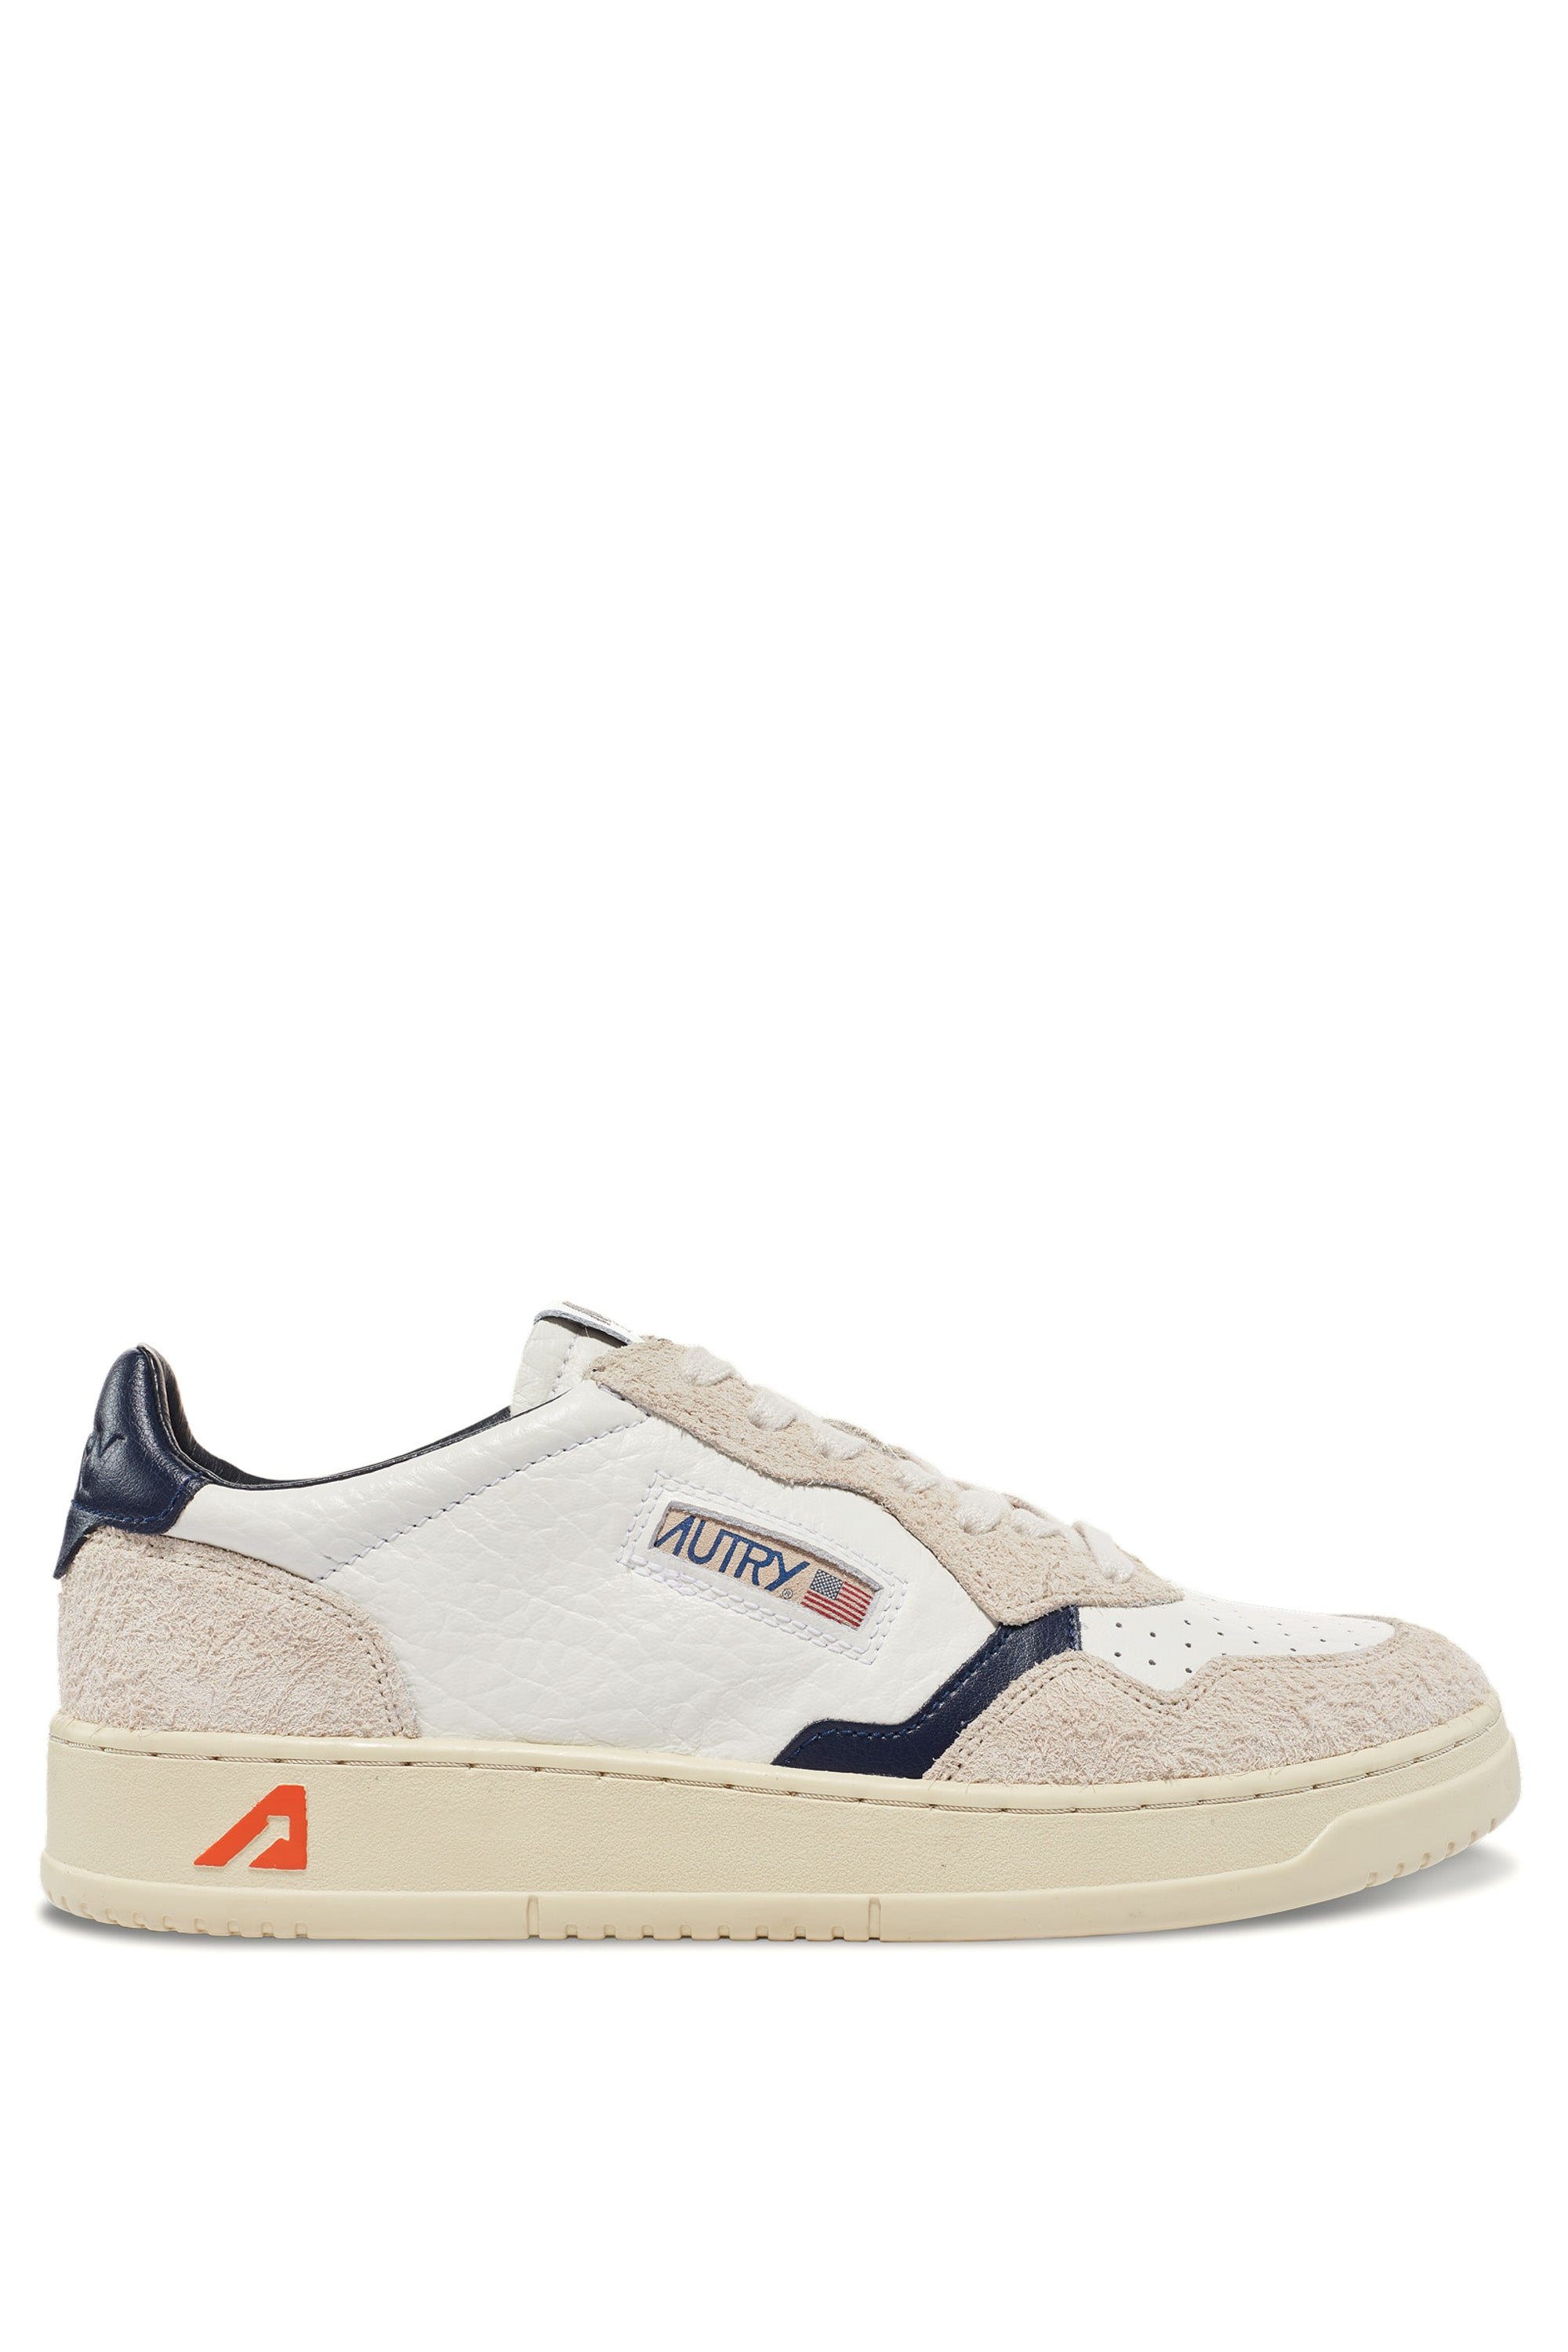 Medalist women's sneakers in two-tone leather and hair-effect suede